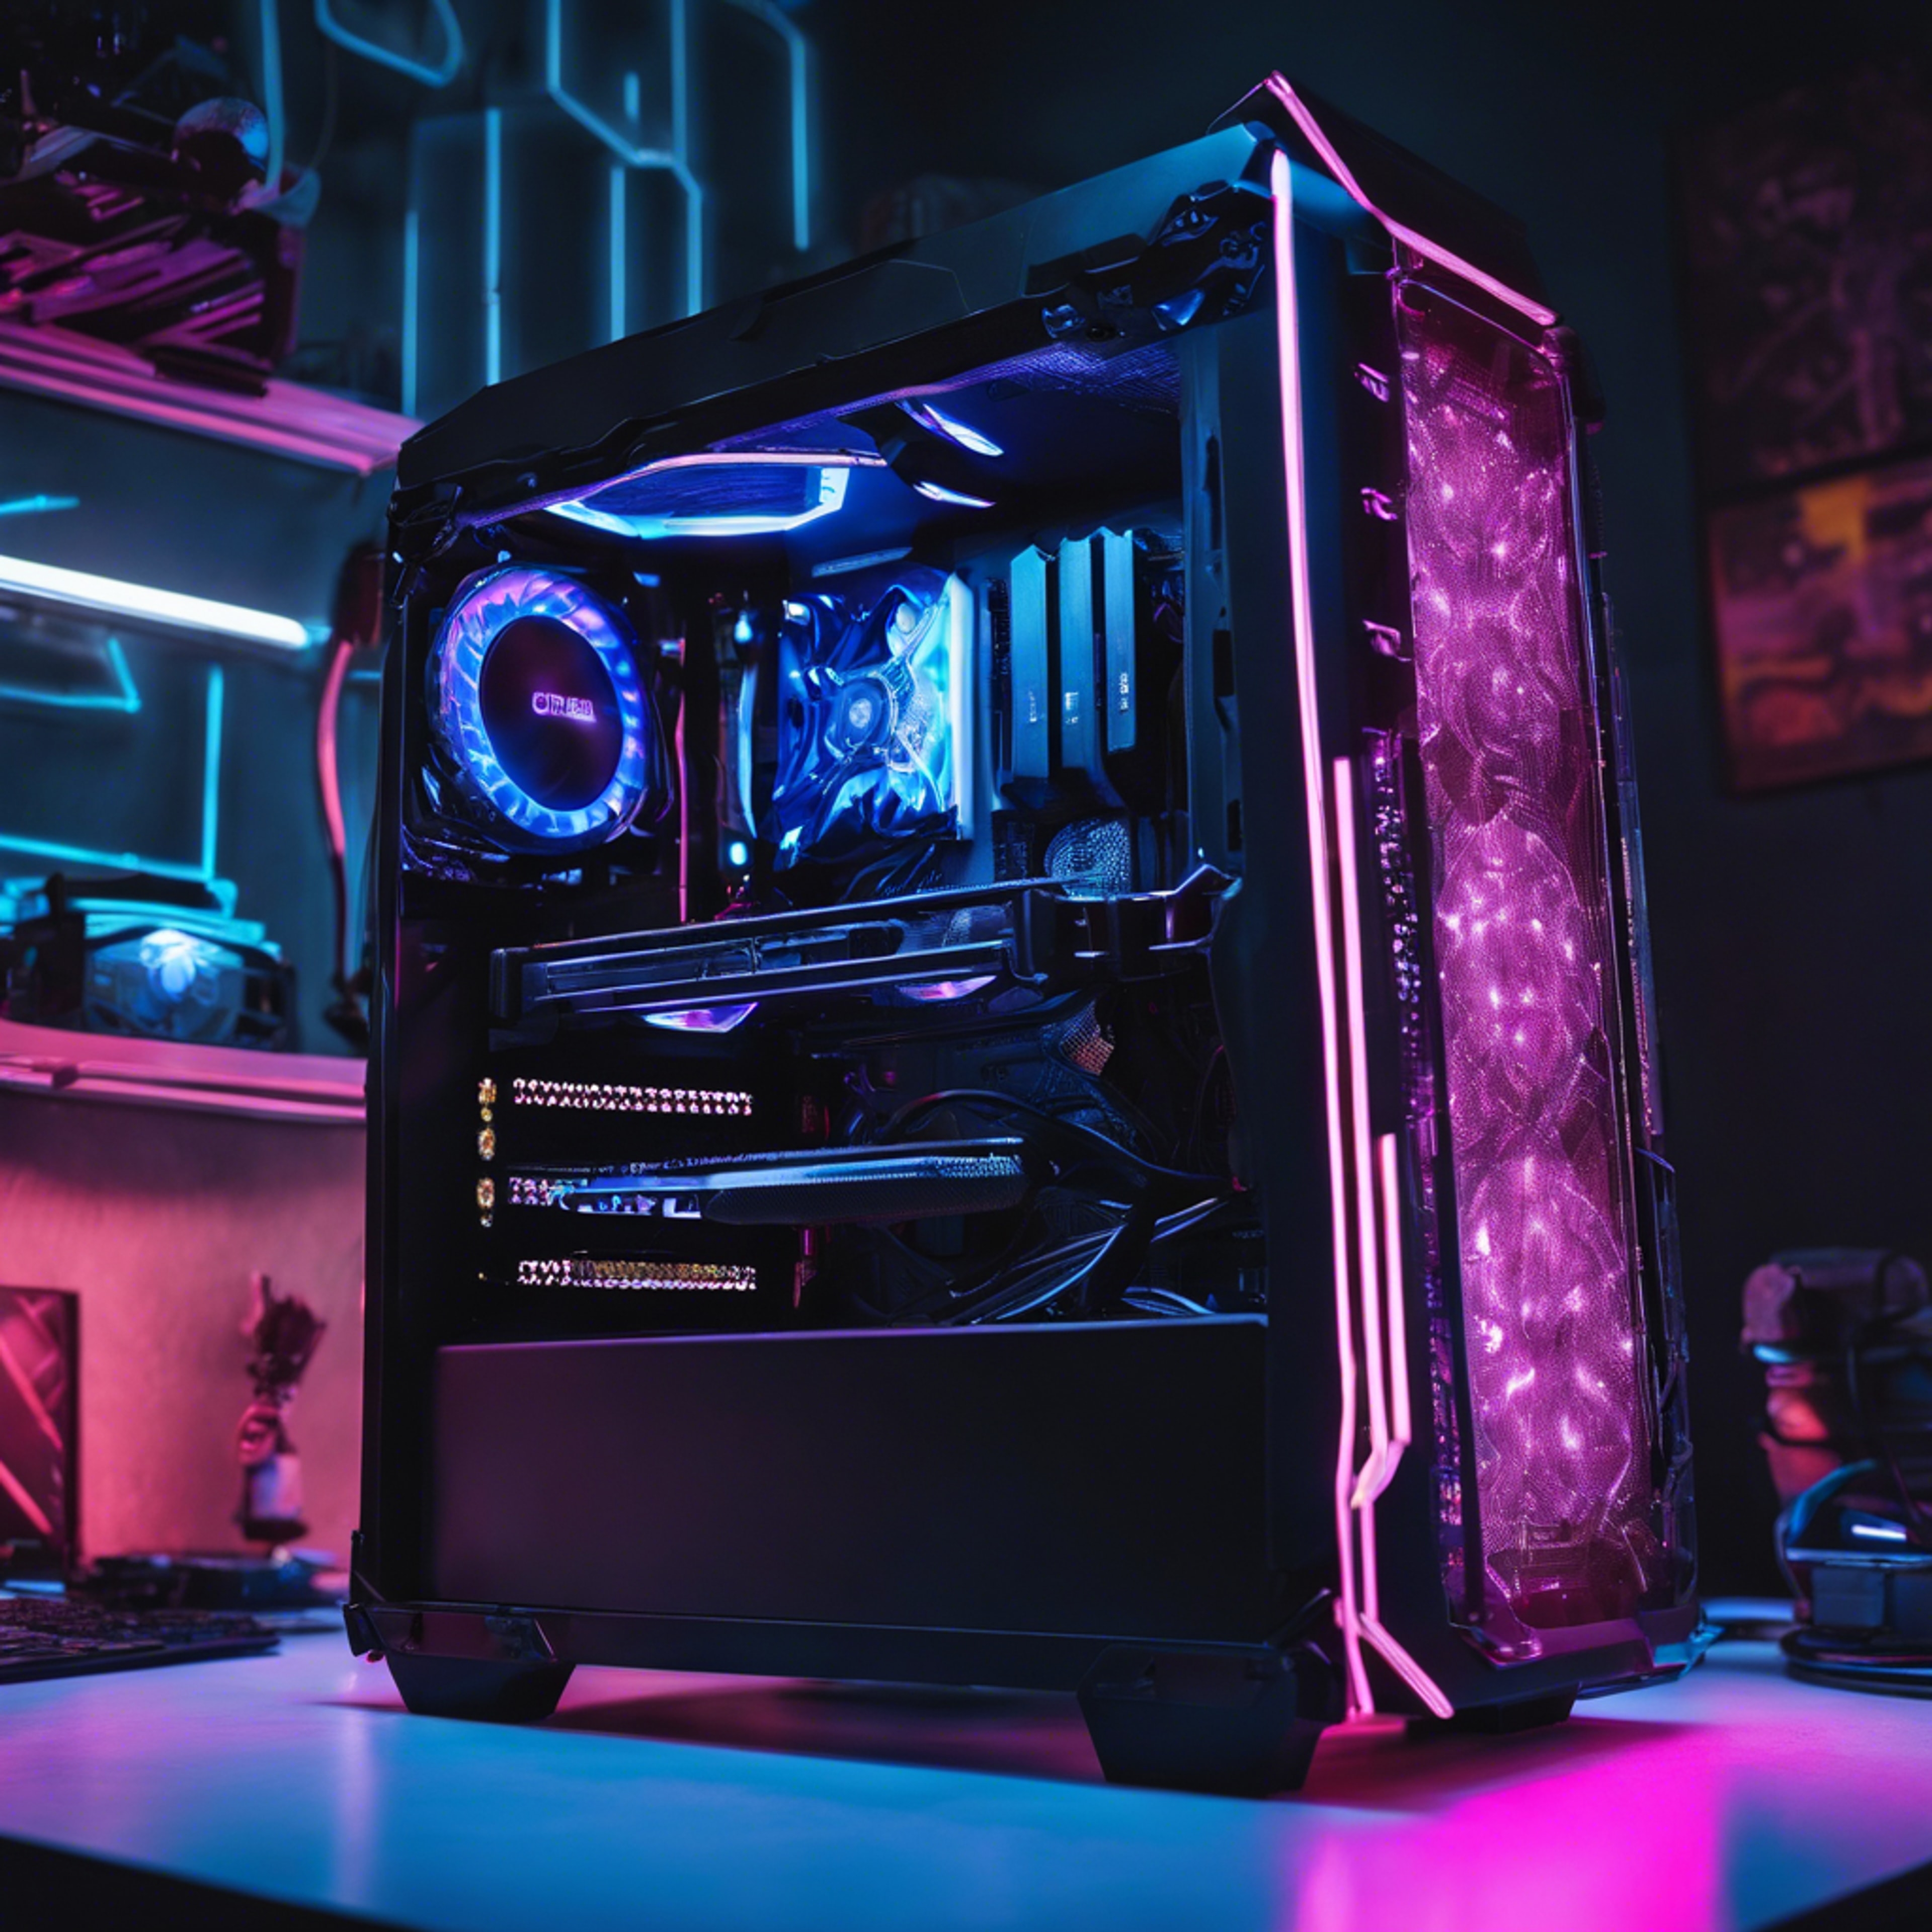 A cyberpunk-style black gaming PC with neon blue LED lights. Шпалери[4f1d7ee7161d4e2894f4]